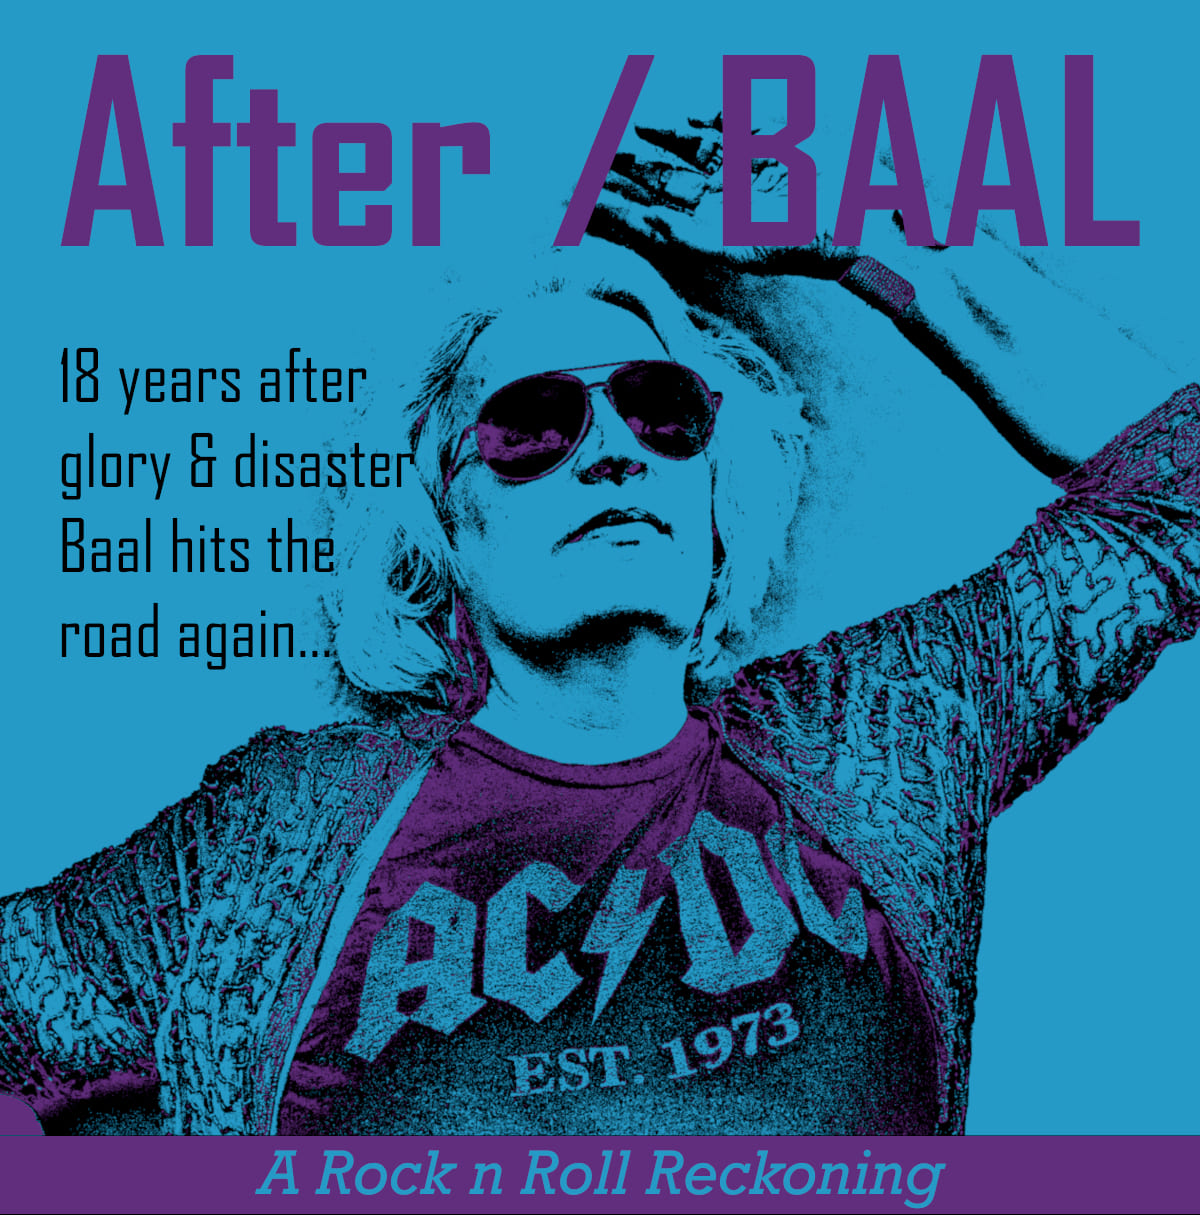 After / BAAL: a new rockin' show in development